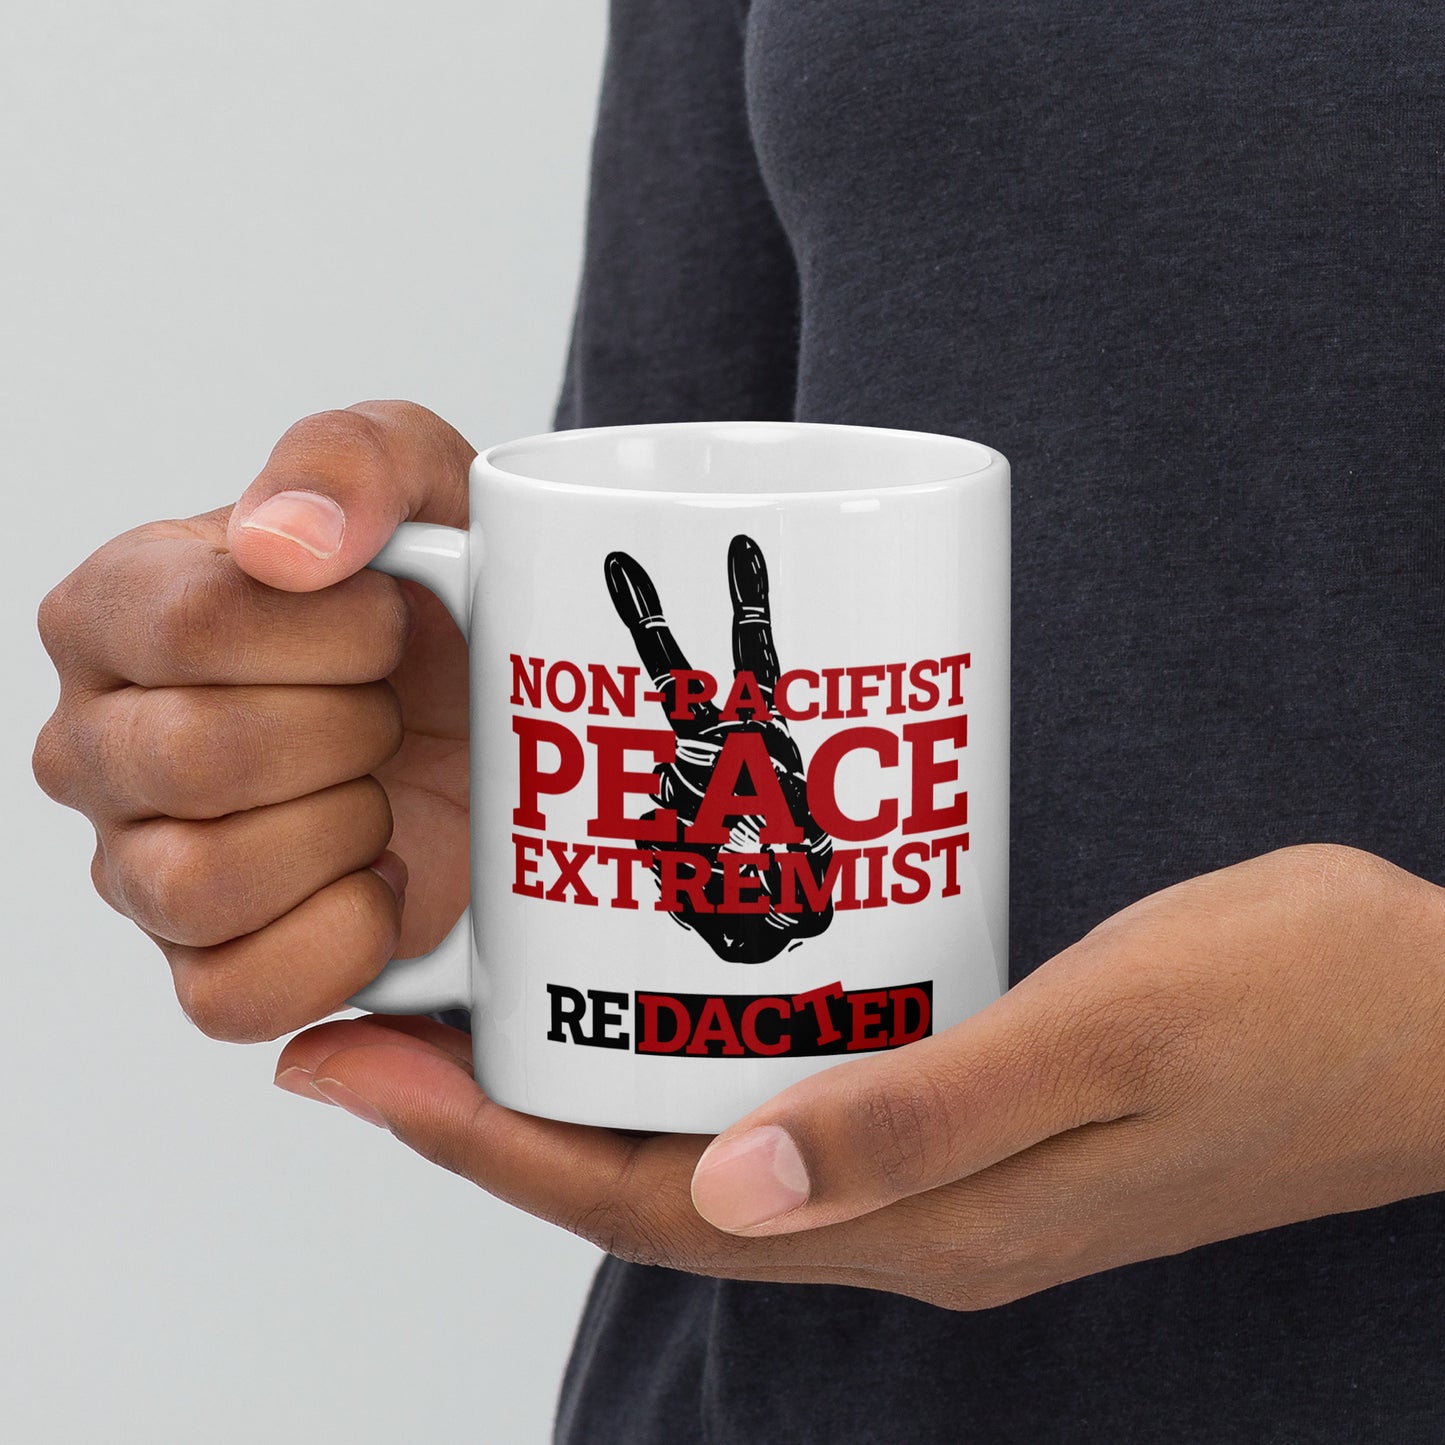 NON-PACIFIST PEACE EXTREMIST White glossy mug